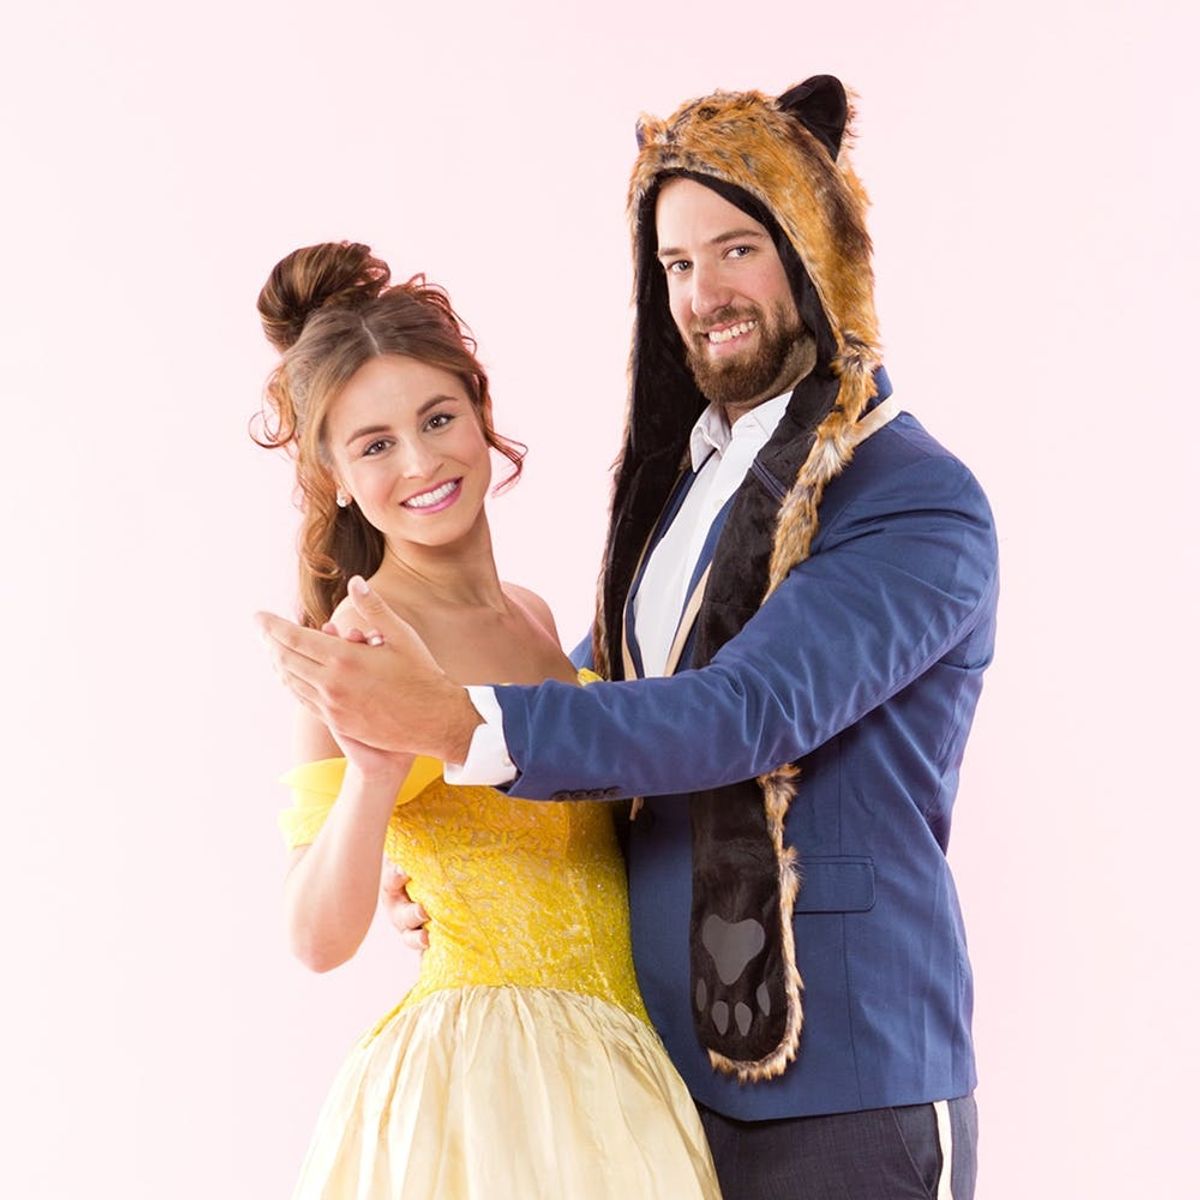 Wear This Beauty and the Beast Couples Costume for an Enchanting Halloween